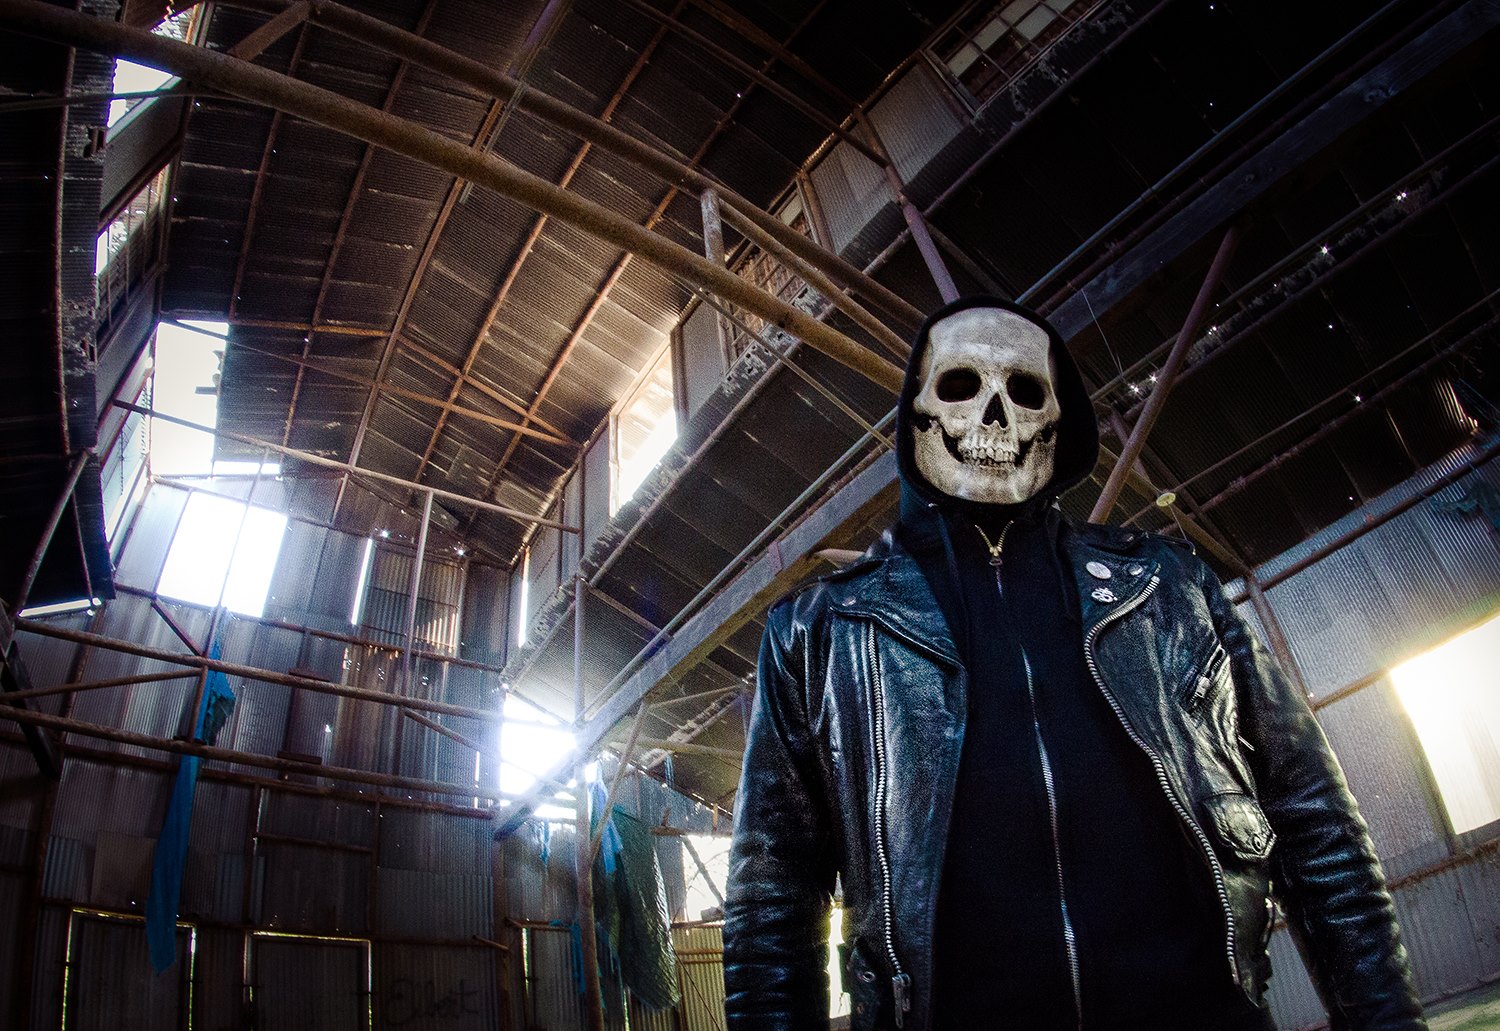 GosT Blends Metal With Moroder and Horror Movies on 'Maleficarum'